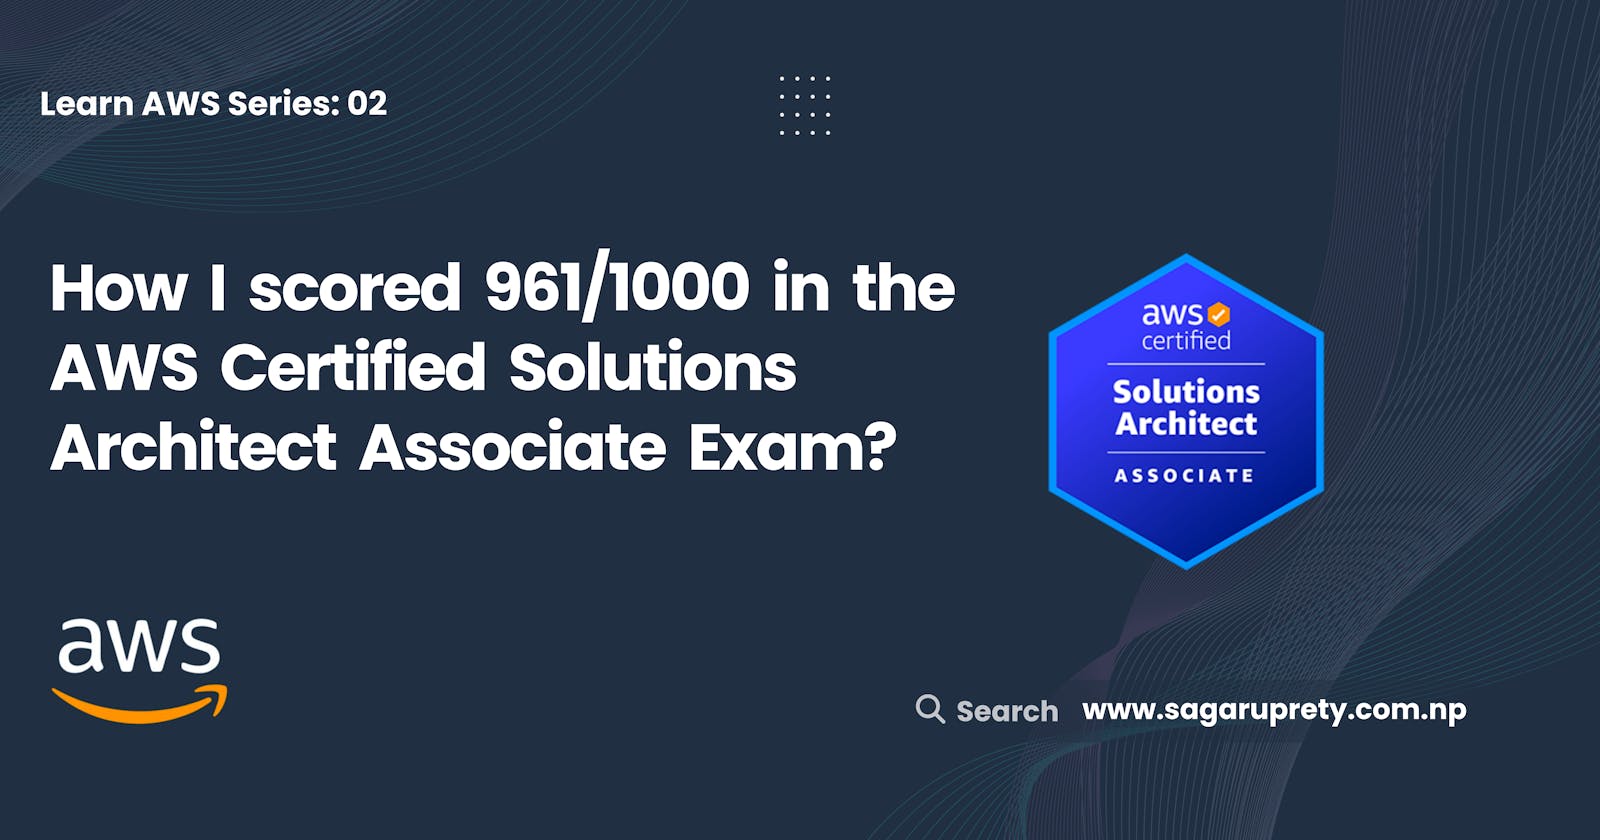 Scoring 961 out of 1000 on the AWS Certified Solutions Architect Associate Exam: My Experience